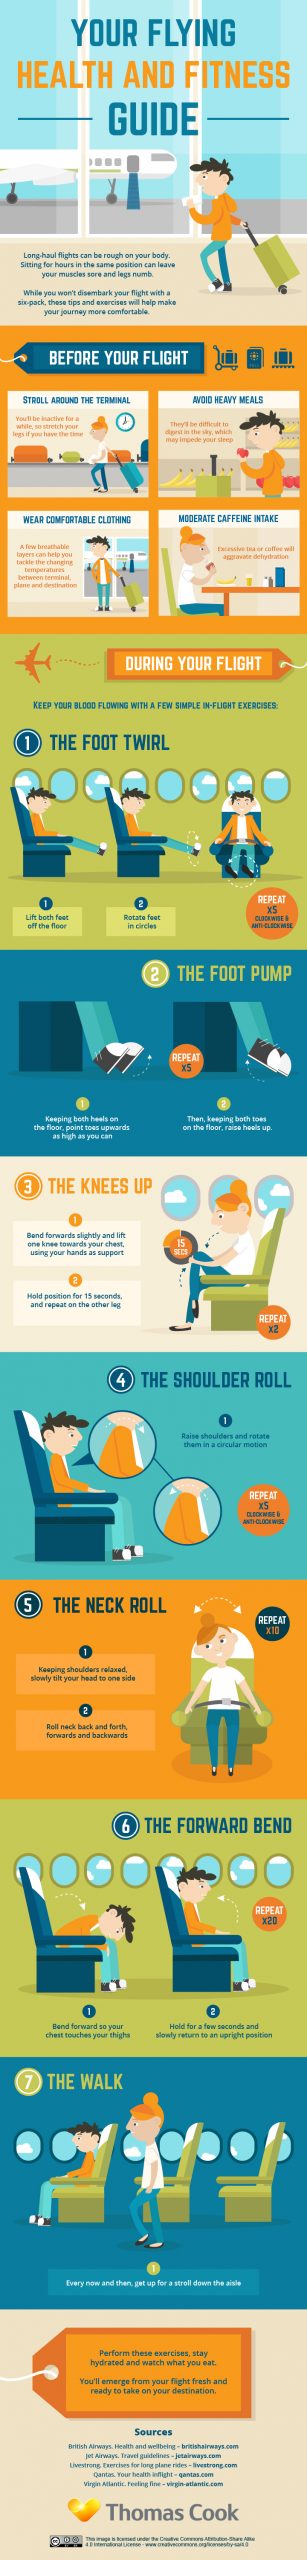 Your Flying Health and Fitness Guide [Infographic]